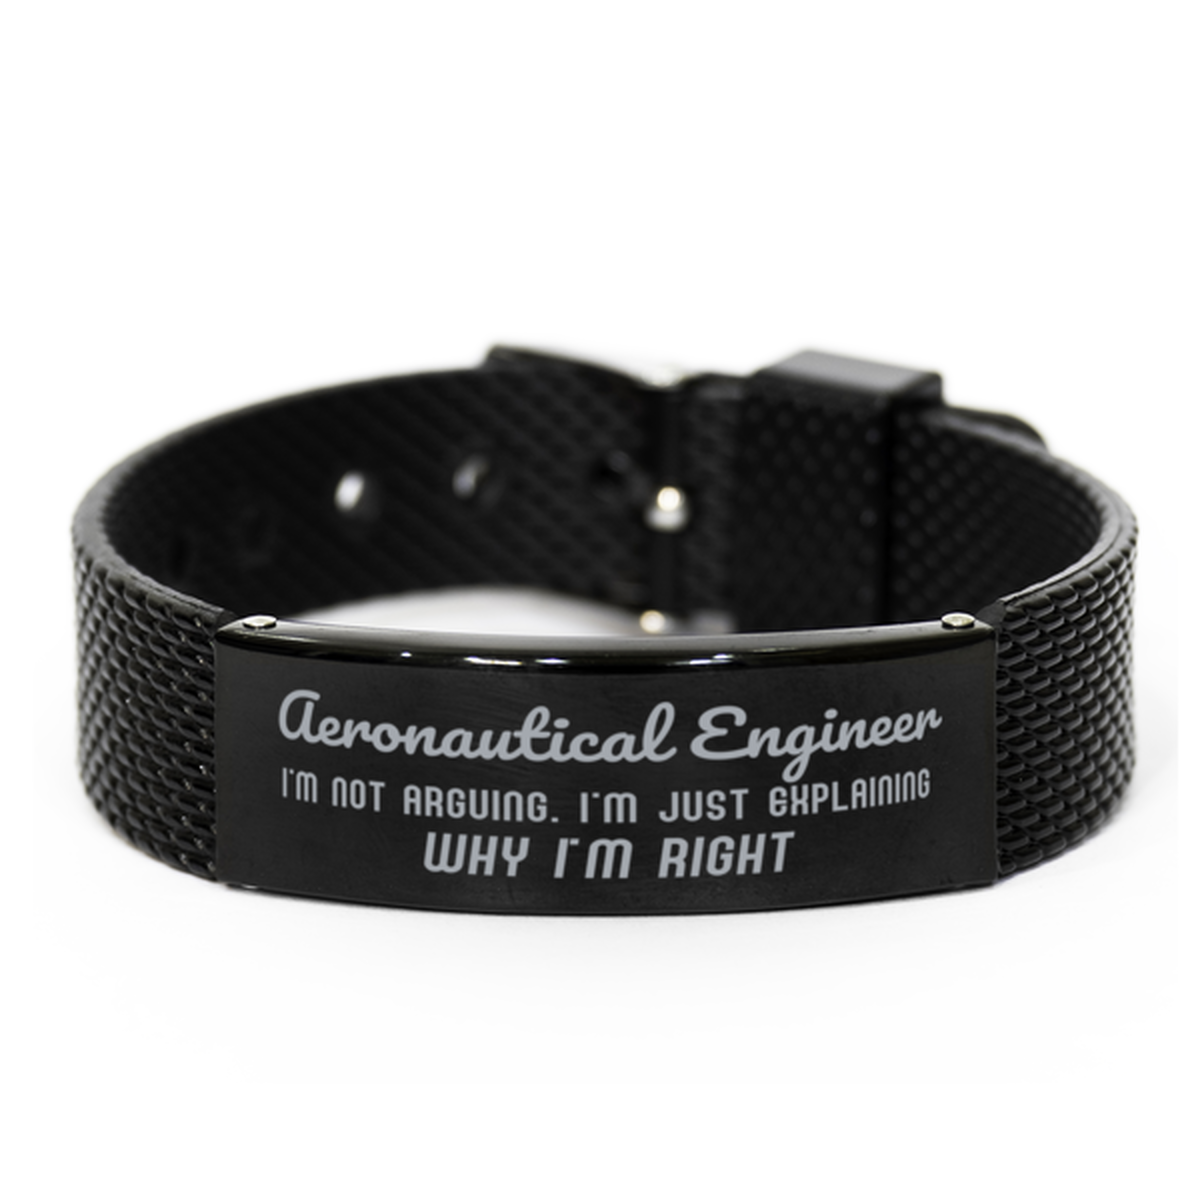 Aeronautical Engineer I'm not Arguing. I'm Just Explaining Why I'm RIGHT Black Shark Mesh Bracelet, Funny Saying Quote Aeronautical Engineer Gifts For Aeronautical Engineer Graduation Birthday Christmas Gifts for Men Women Coworker